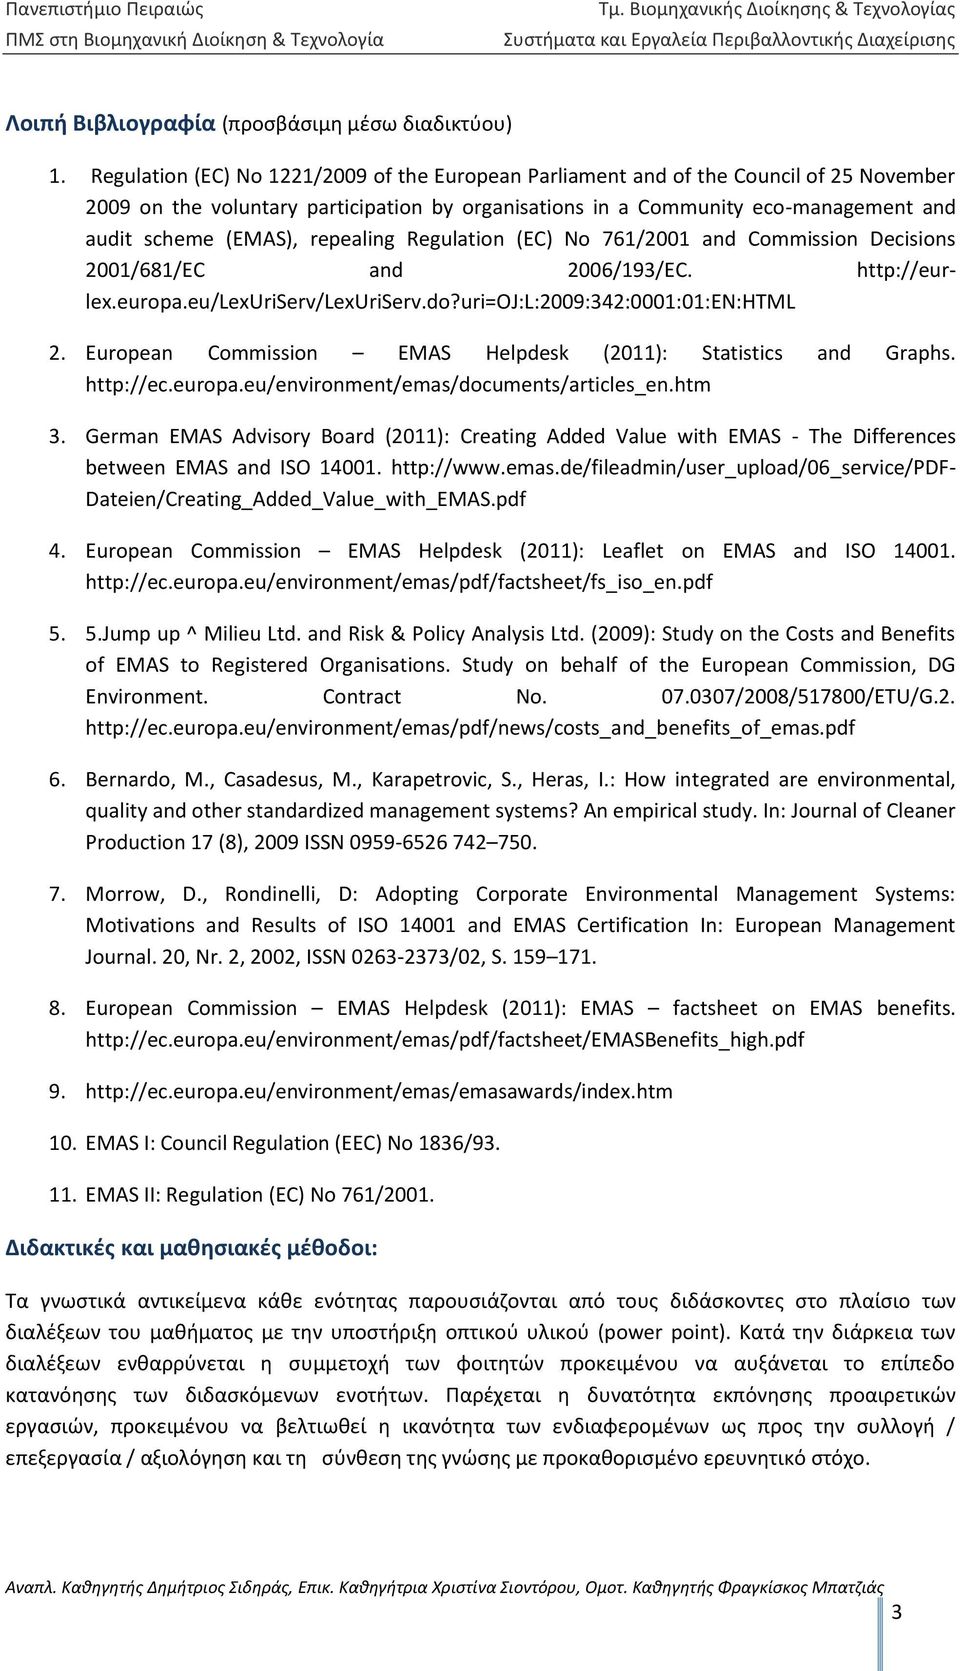 Regulation (EC) No 1221/2009 of the European Parliament and of the Council of 25 November 2009 on the voluntary participation by organisations in a Community eco-management and audit scheme (EMAS),